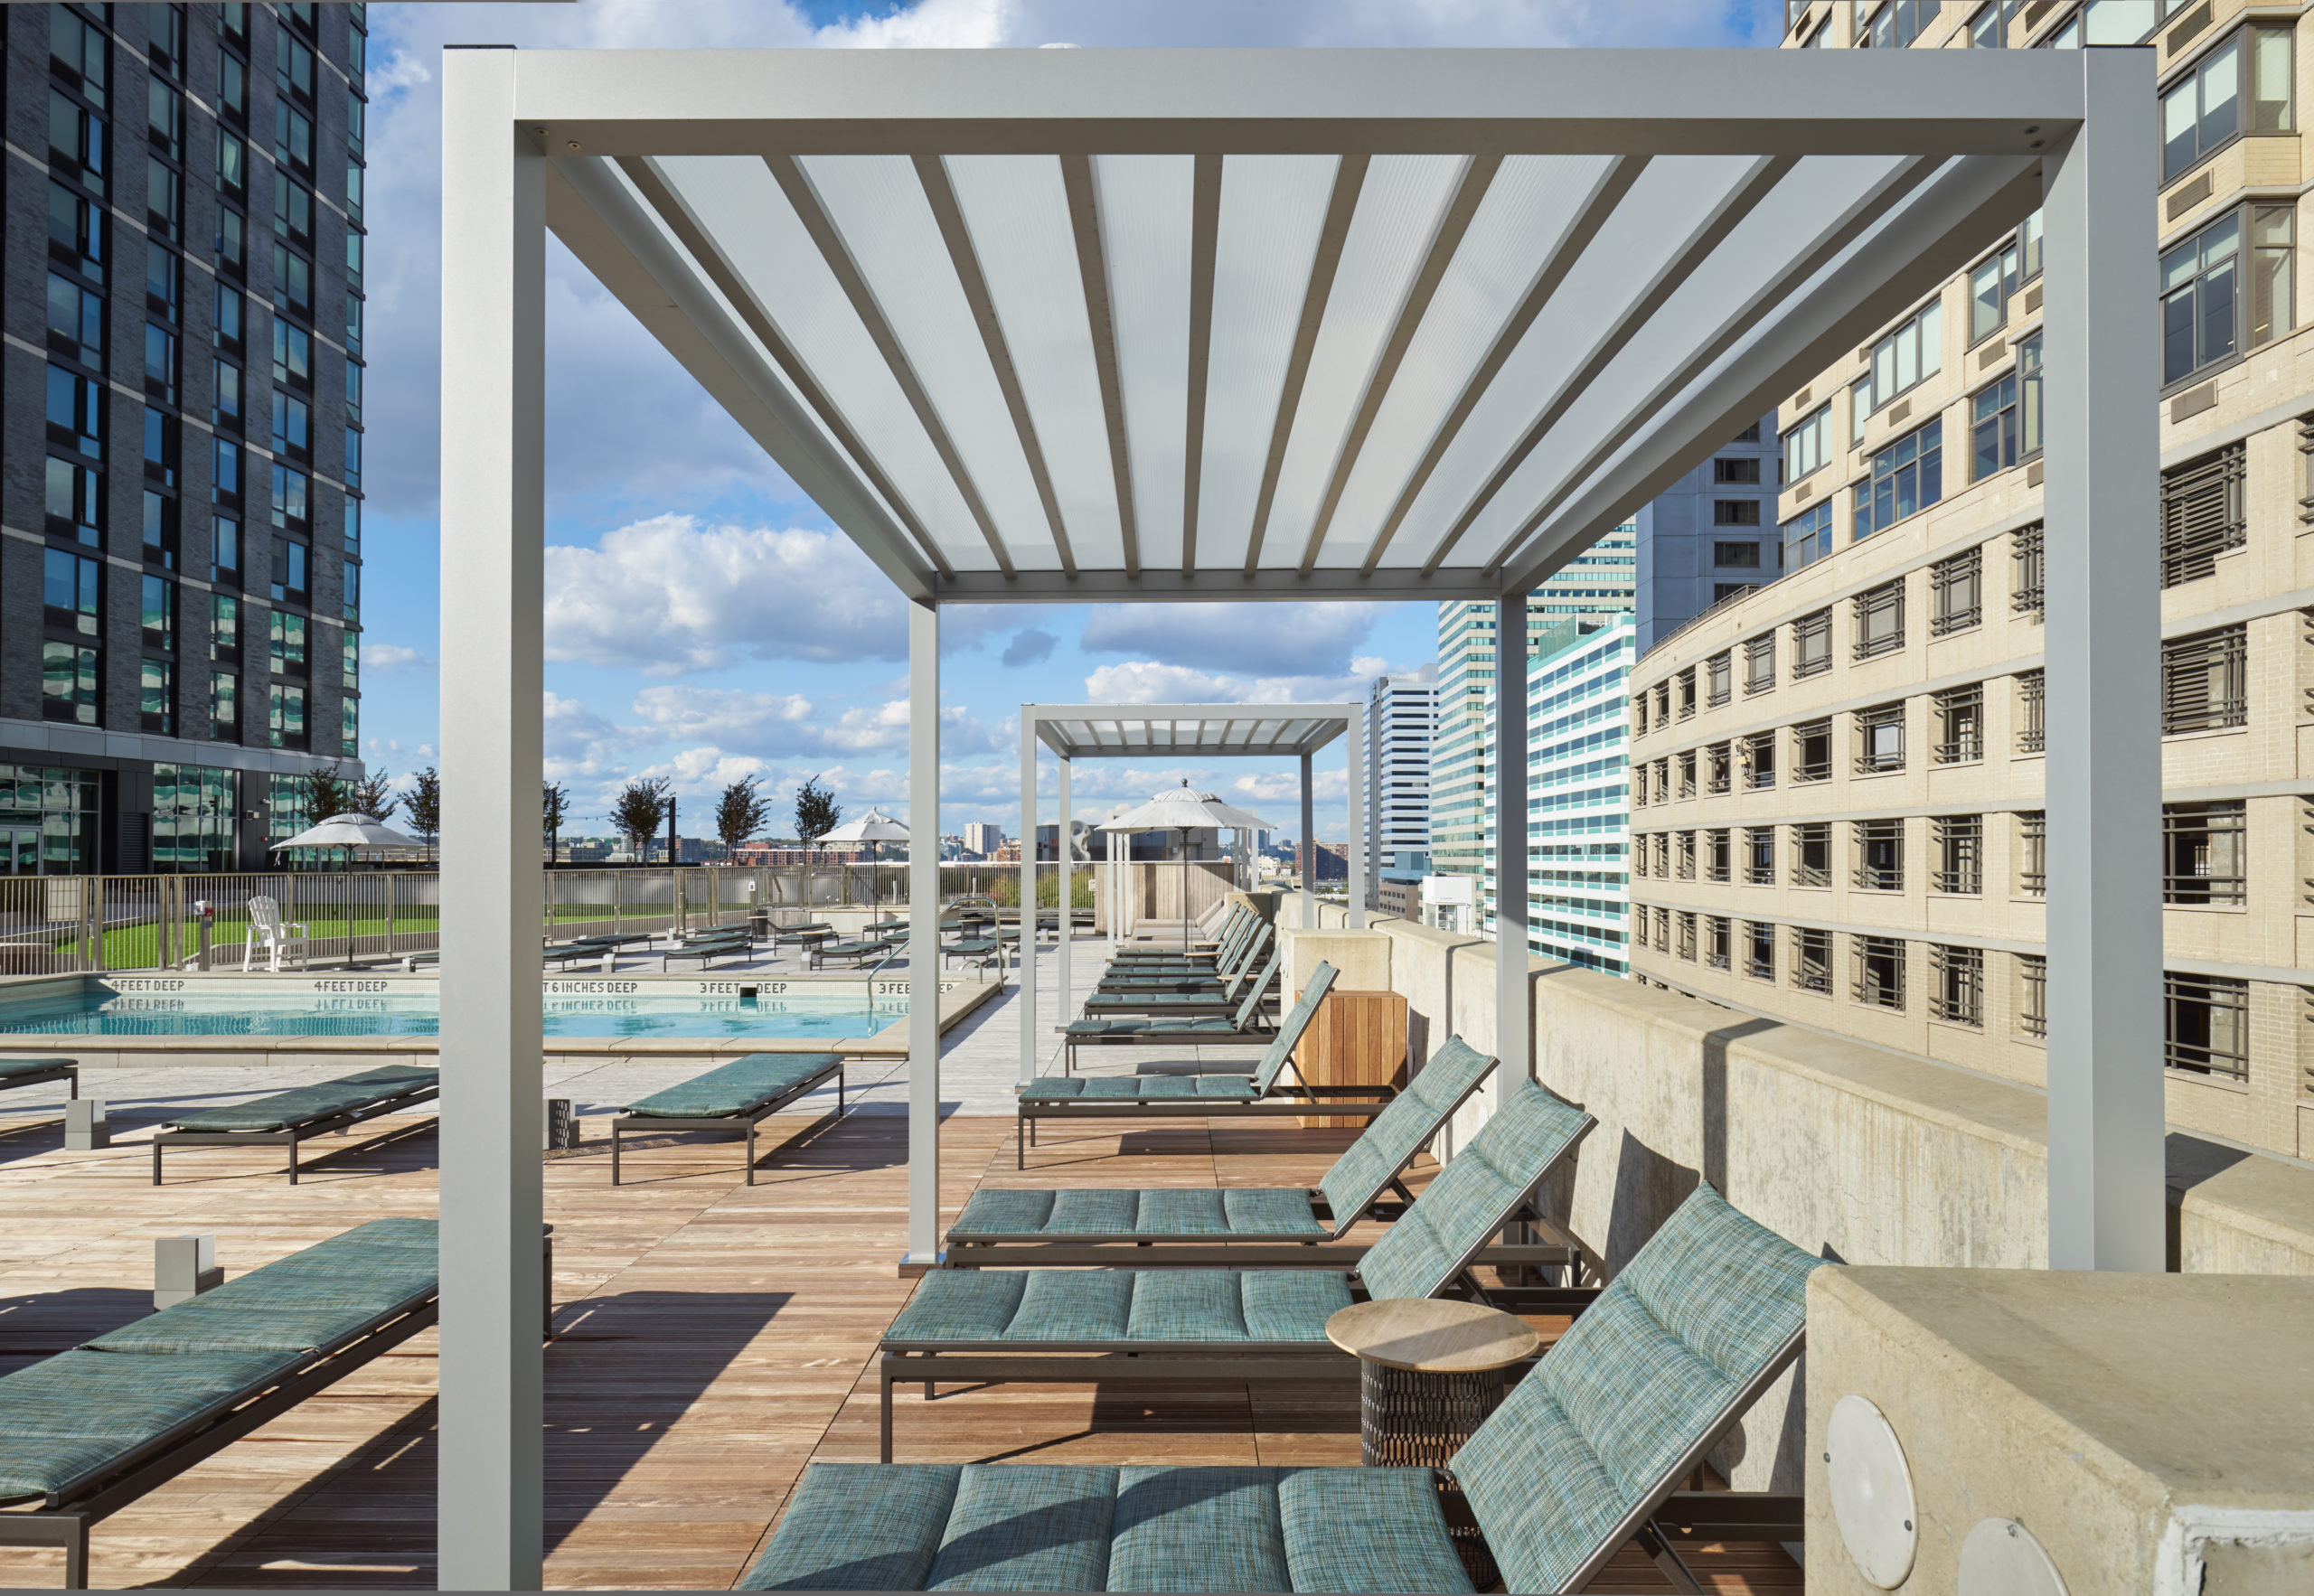 vyv south rooftop lounge chairs by the pool